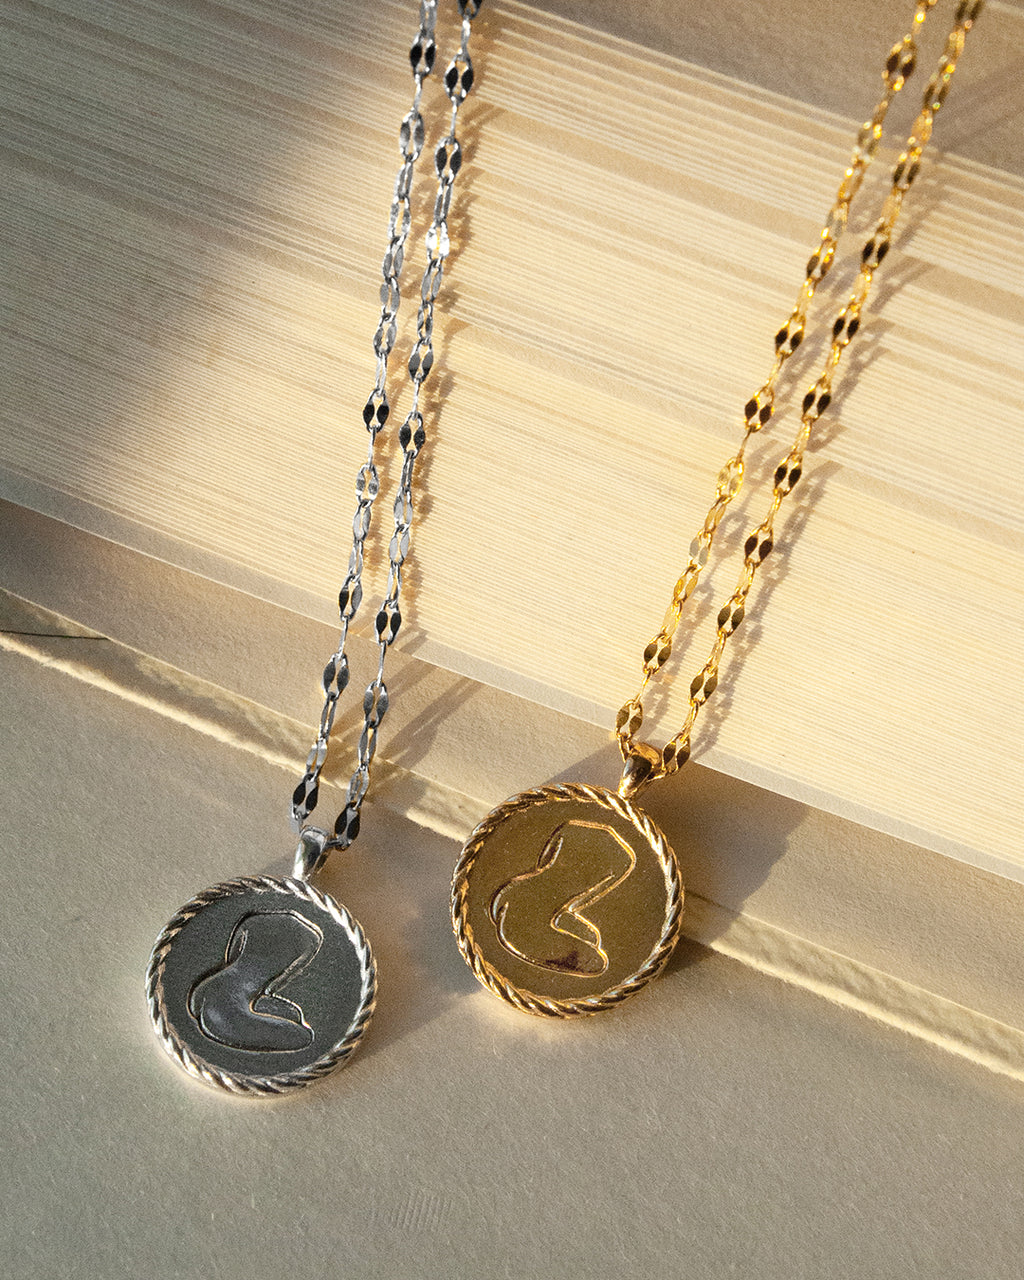 Self | Silver Round Woman Pendant Necklace